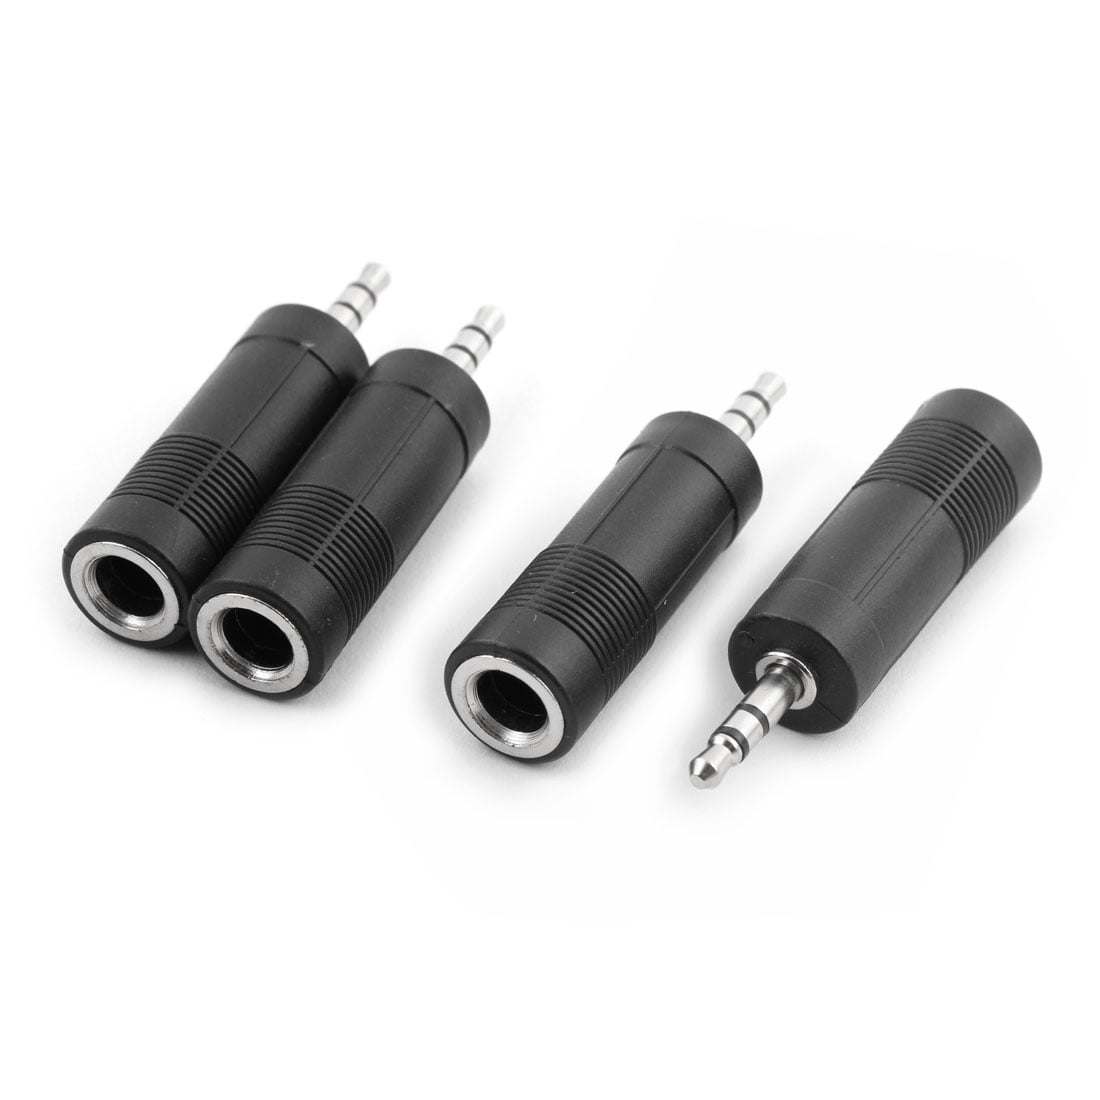 Microphone 6.35mm Female to 3.5mm Male Audio Connector Adapter Black 4pcs 